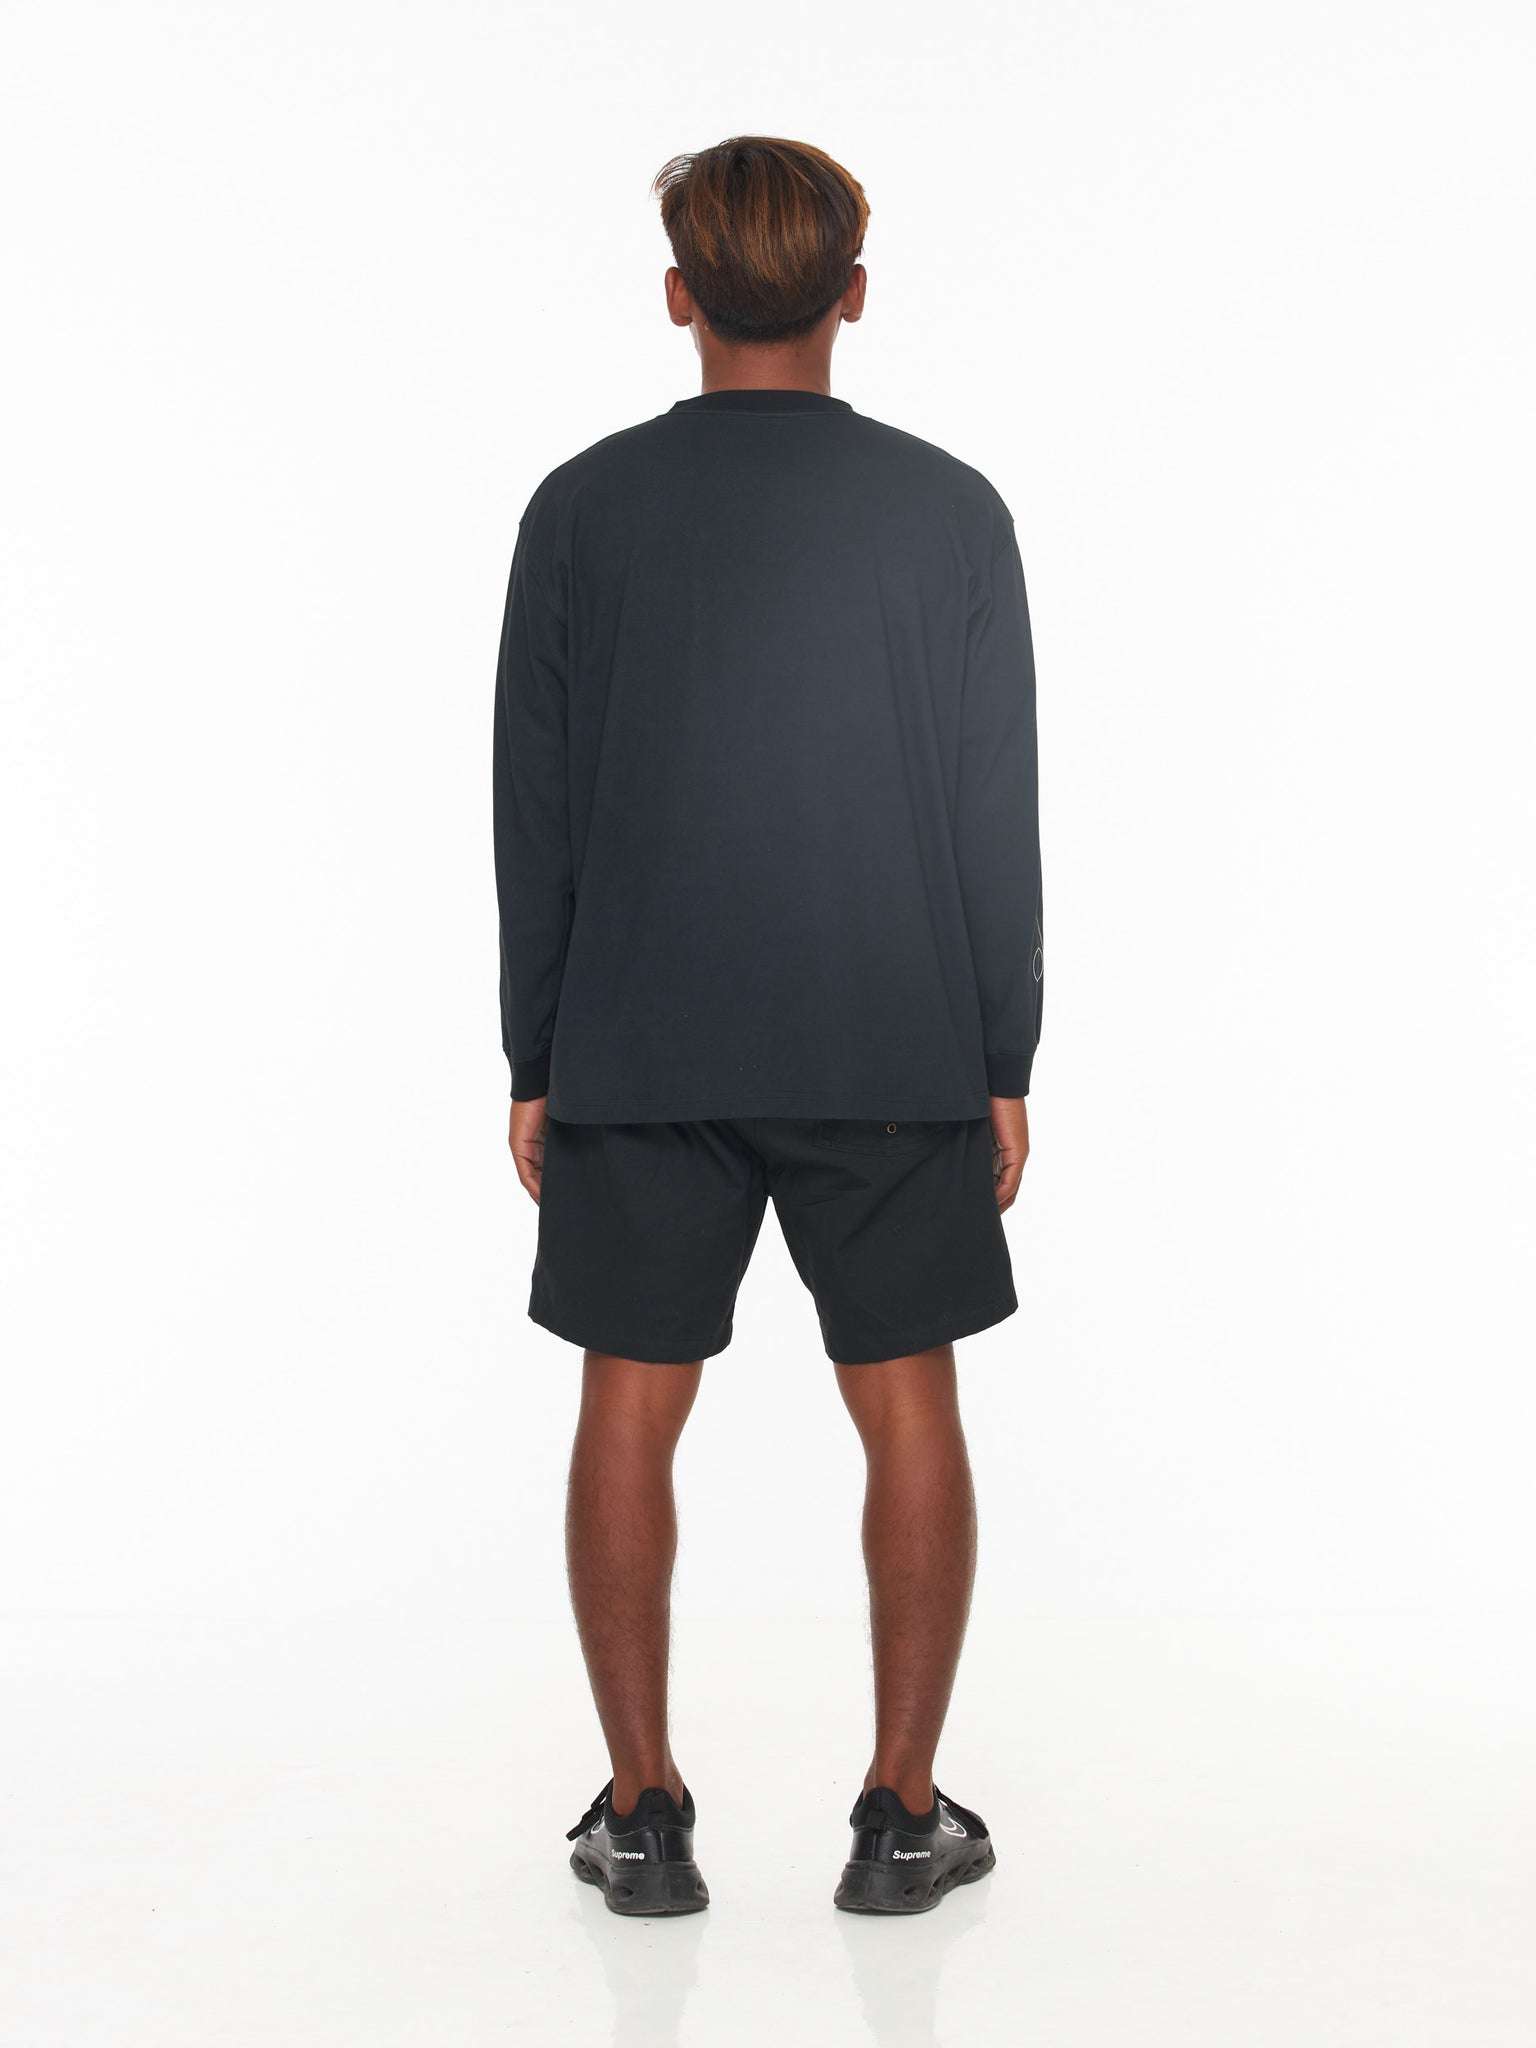 Earth Island - Surf Culture and Lifestyle - Product - Black Long Sleeve